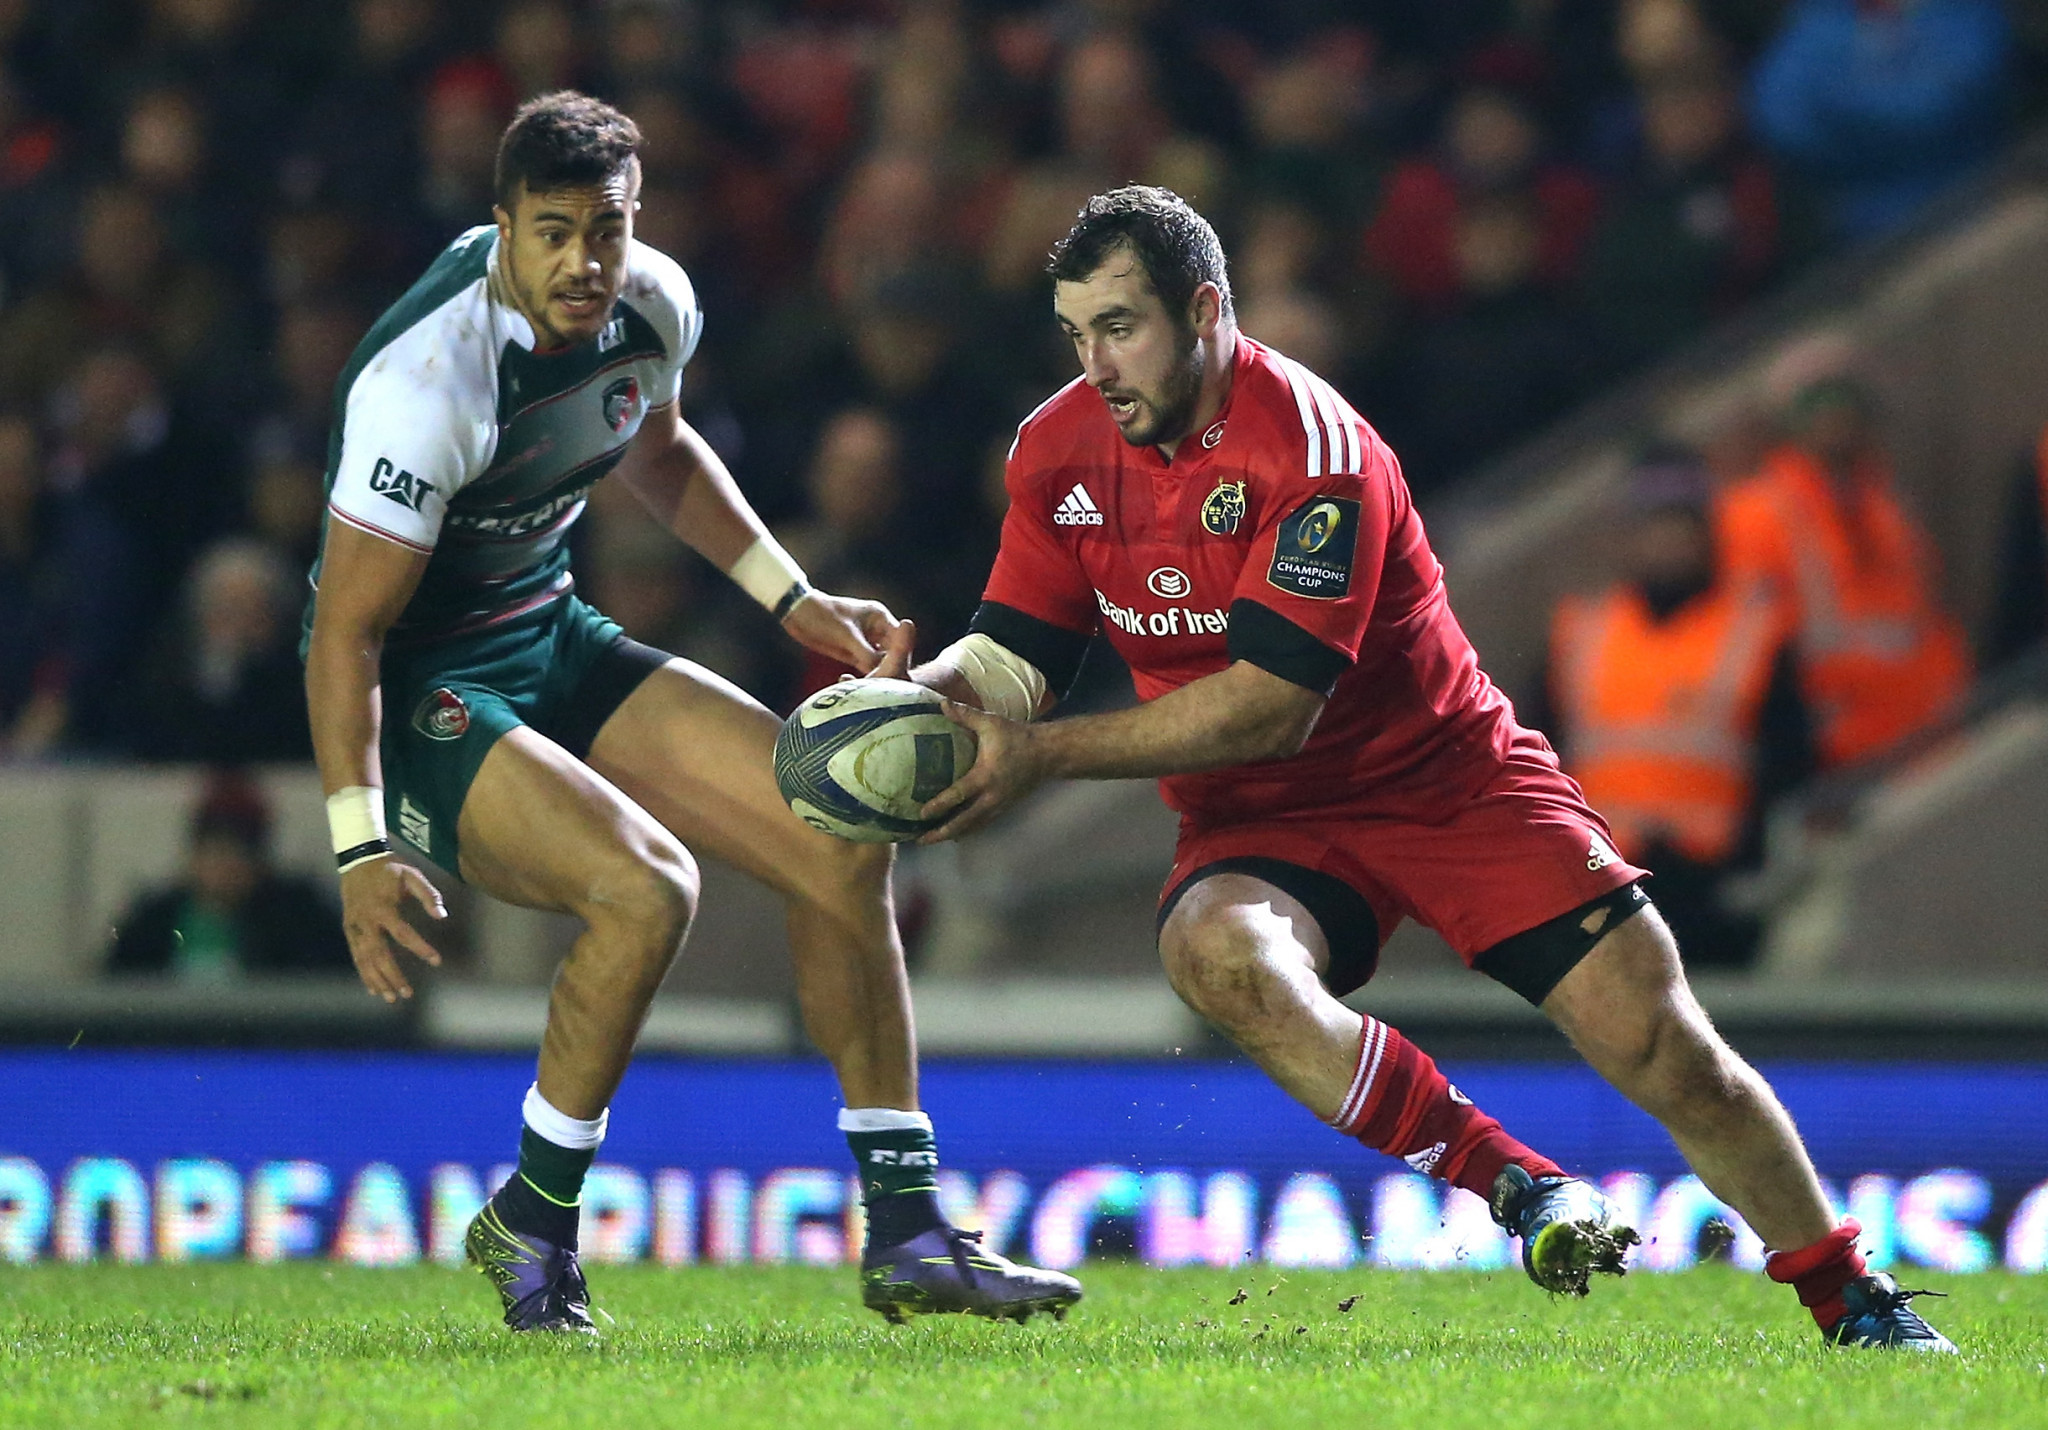 Sport Ireland decide not to appeal rugby player Cronin's ban